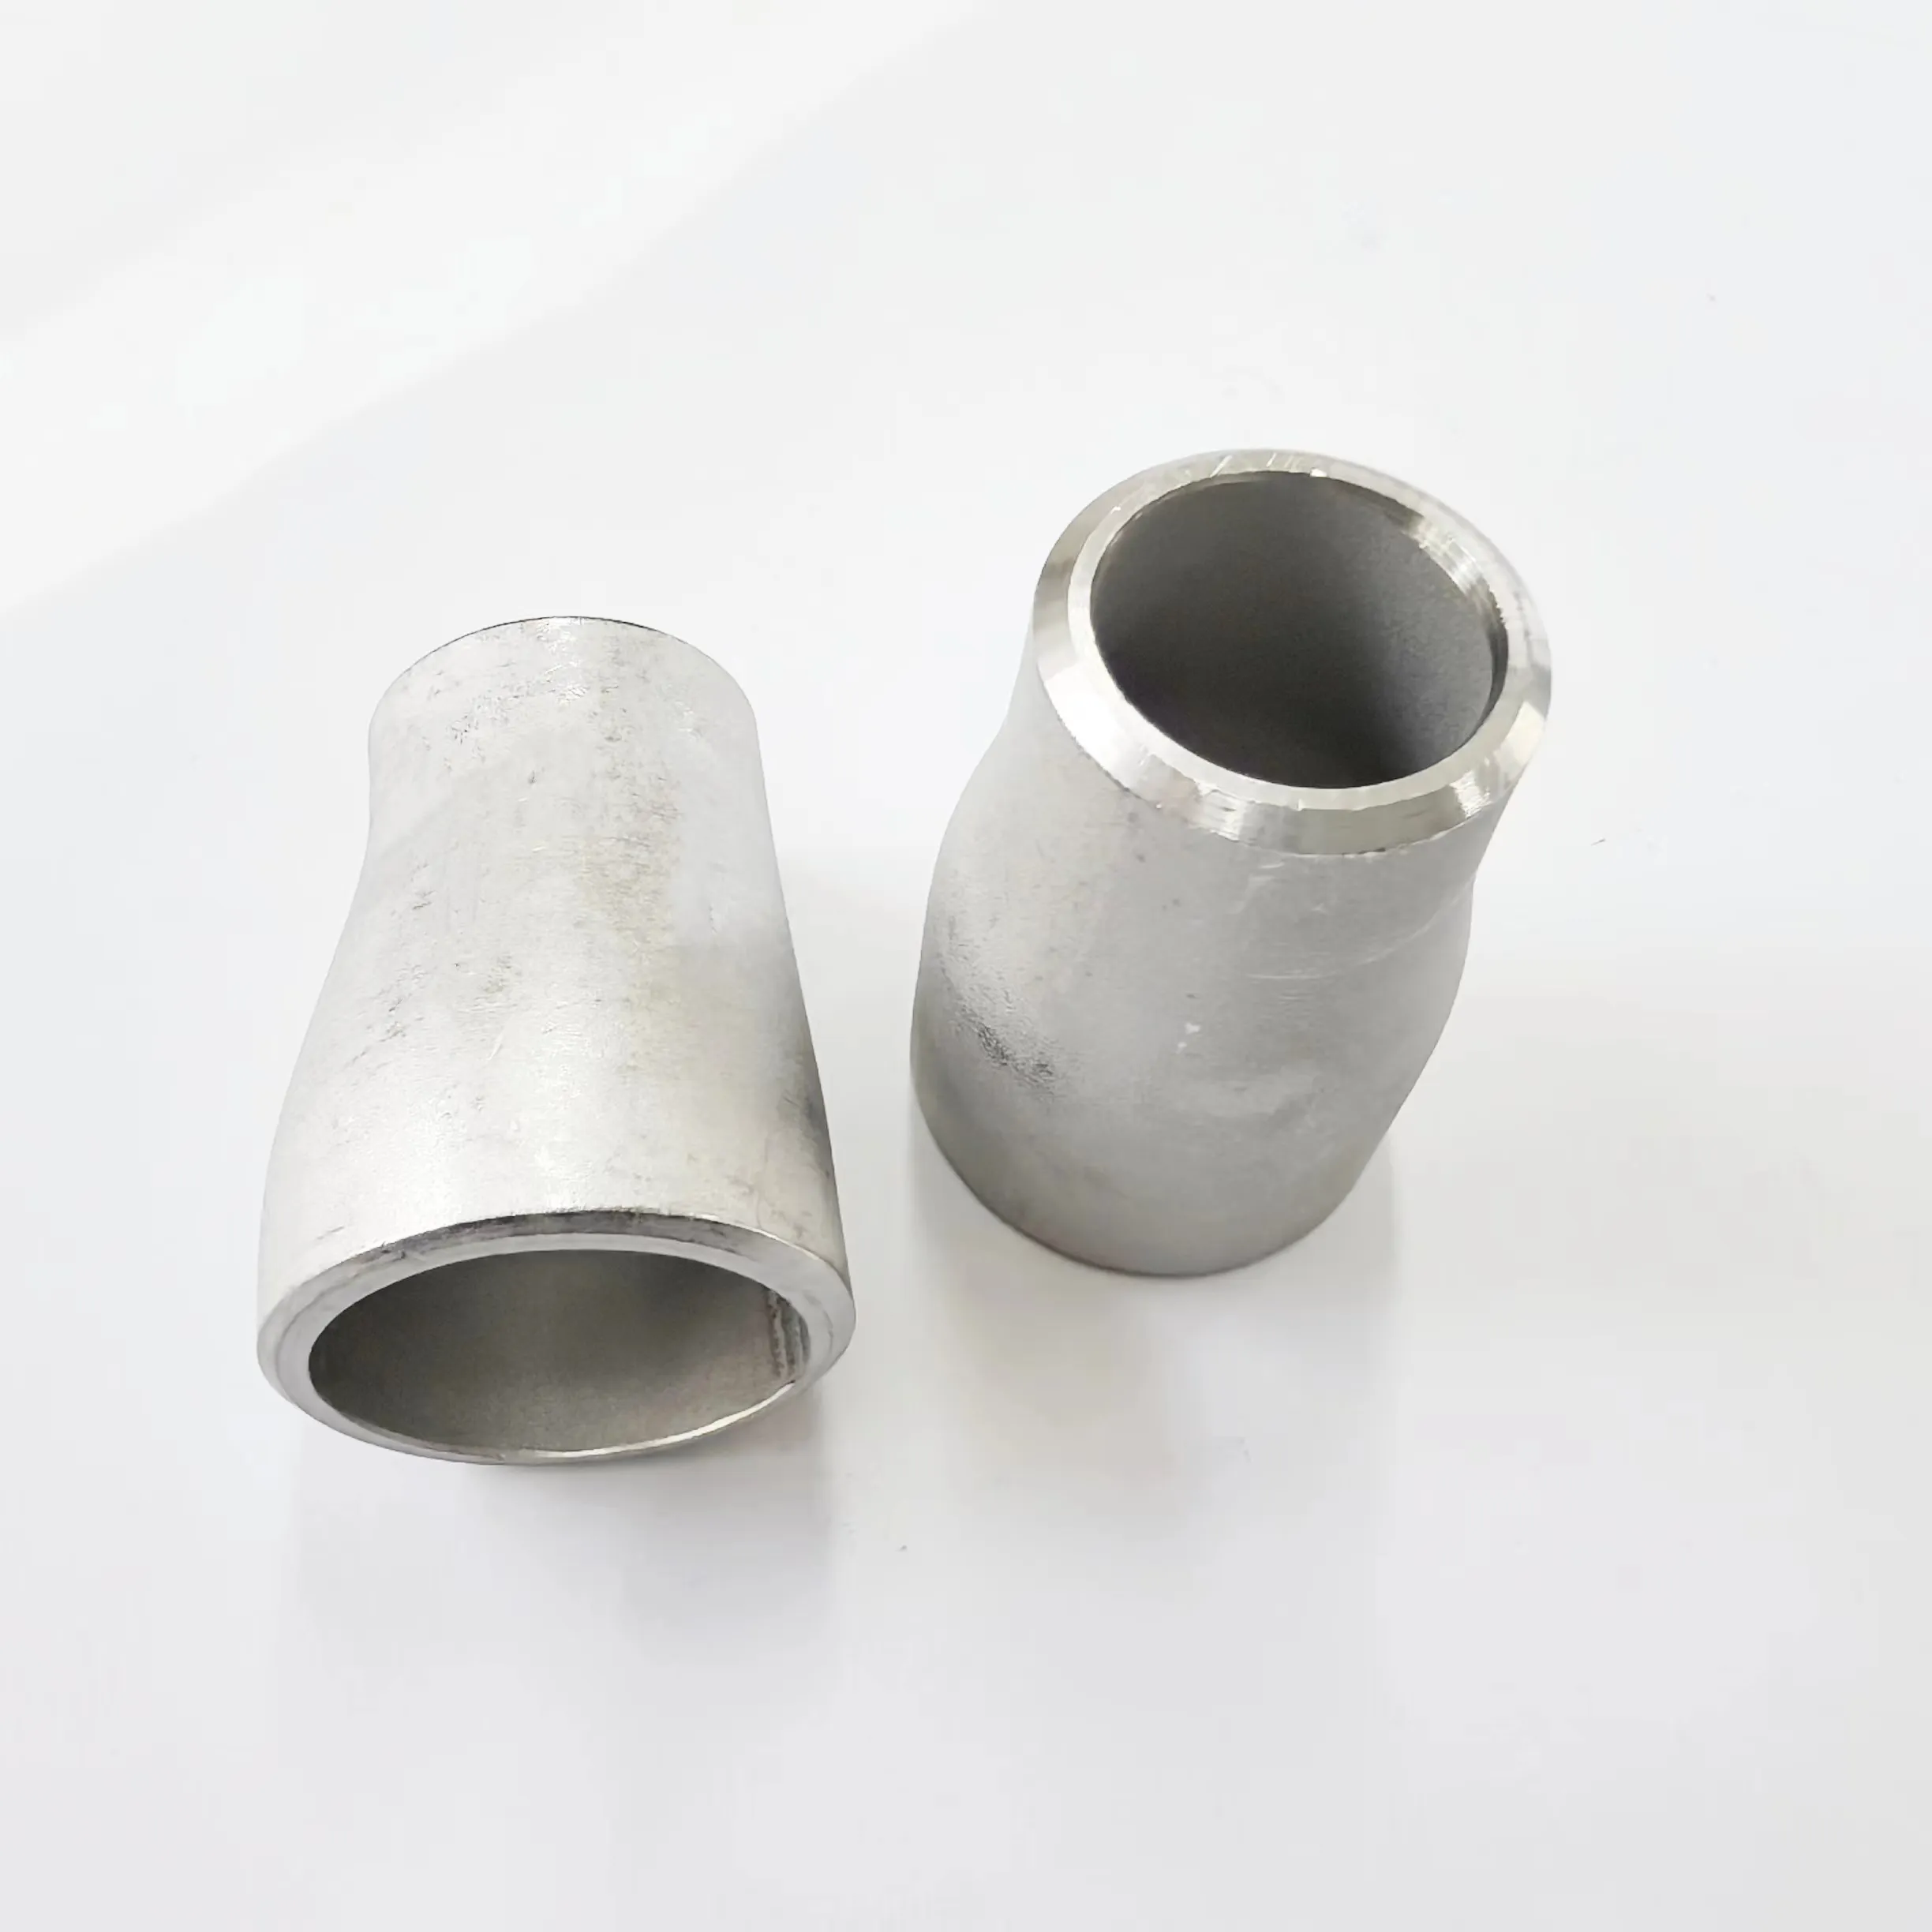 Steel Water Welding Reducer Pipe Fittings Connector with round Head,weld reducer